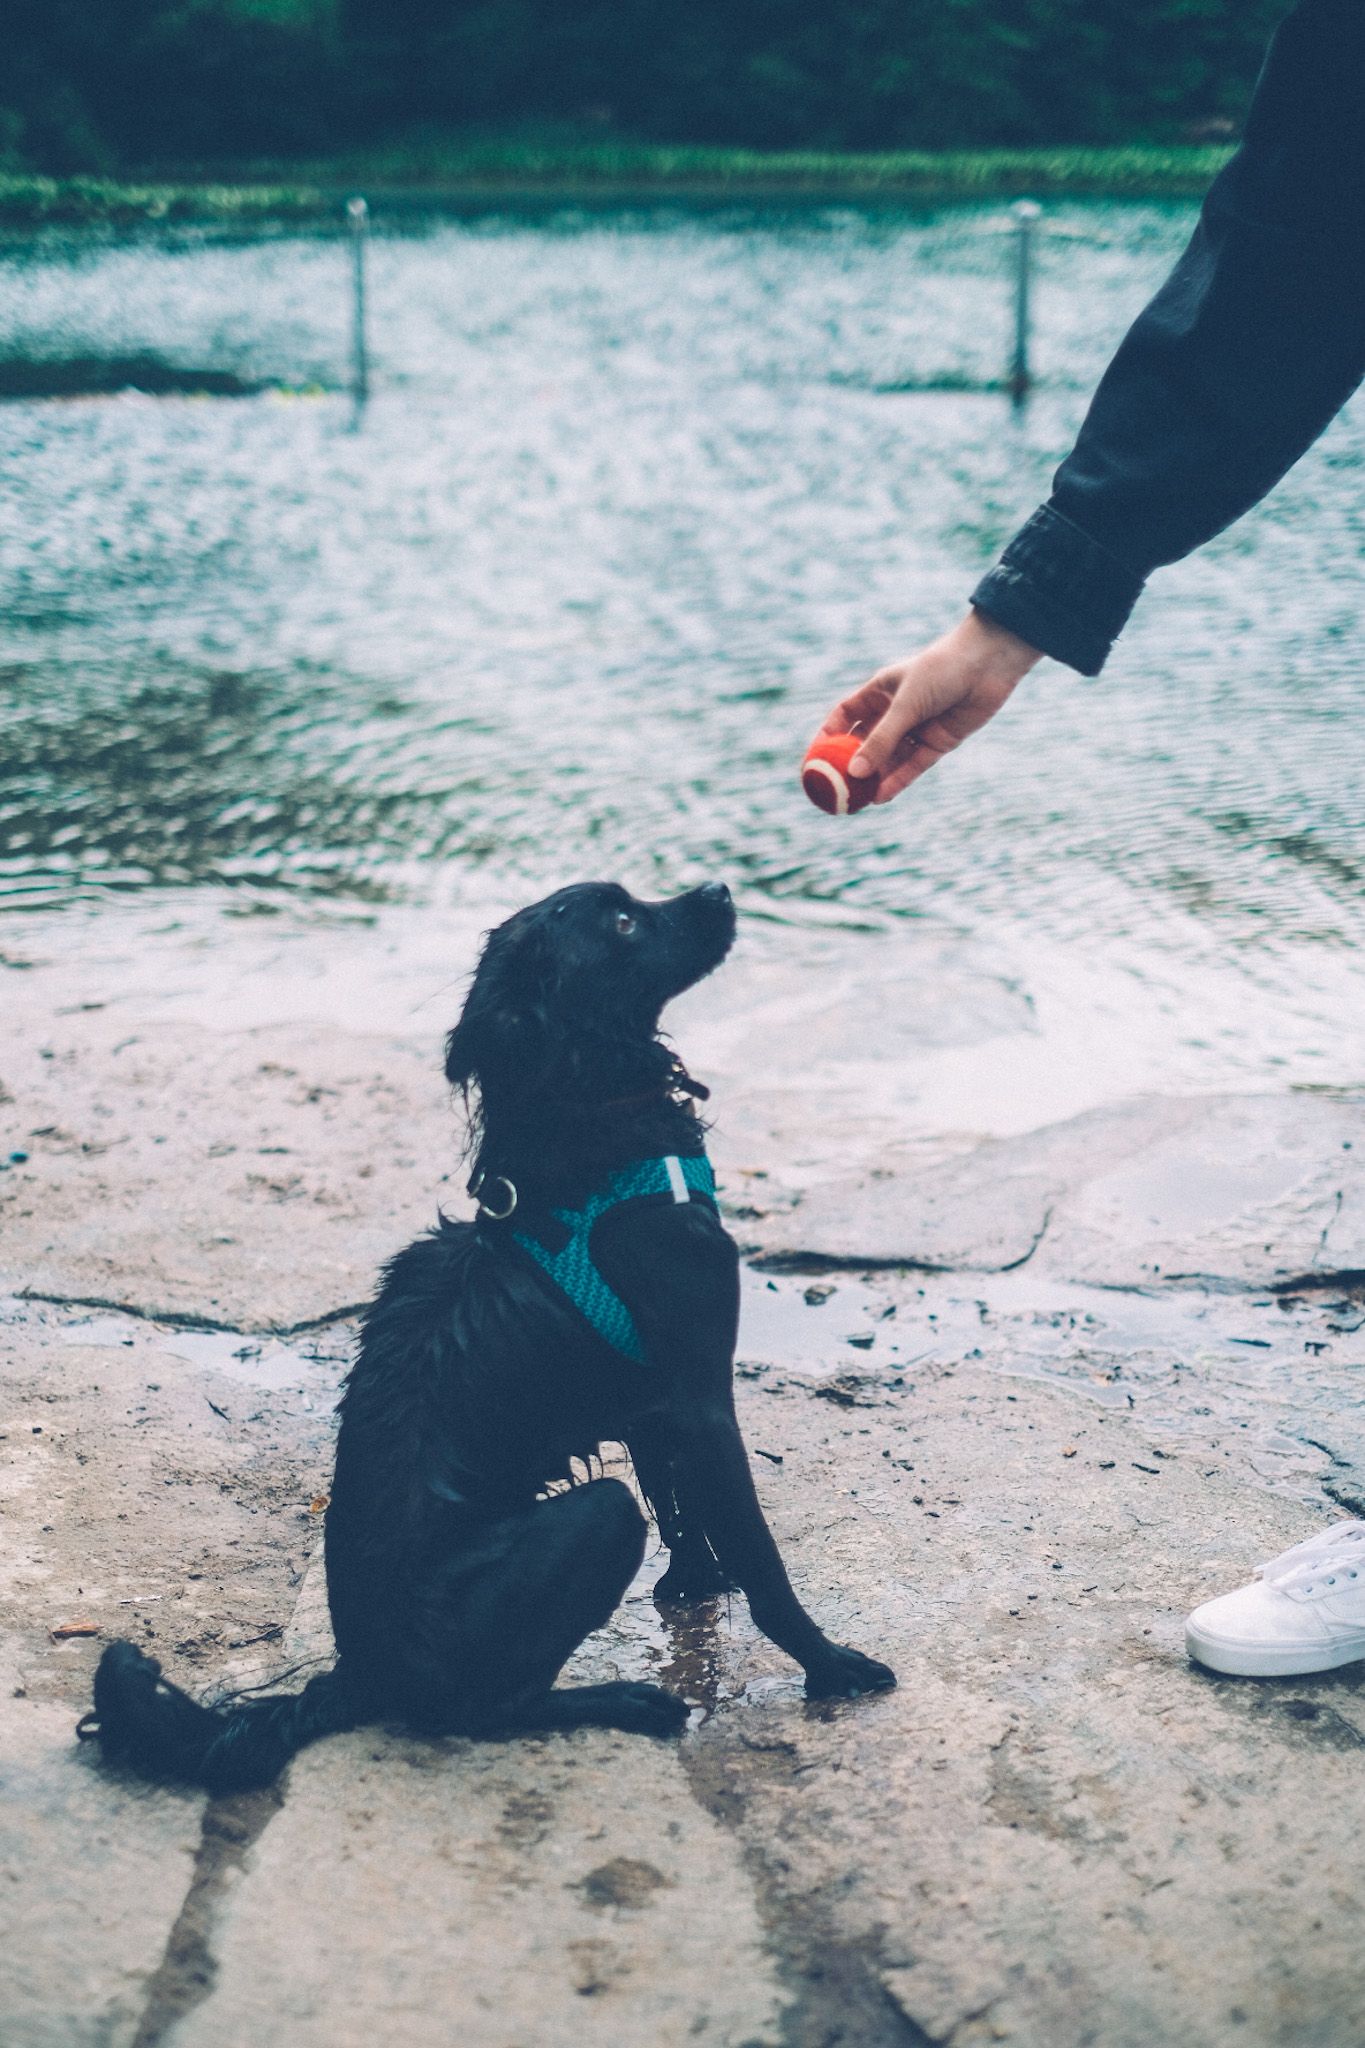 In front of a small pond, a hand holds out a red tennis ball to a small black dog, looking at the ball intently.